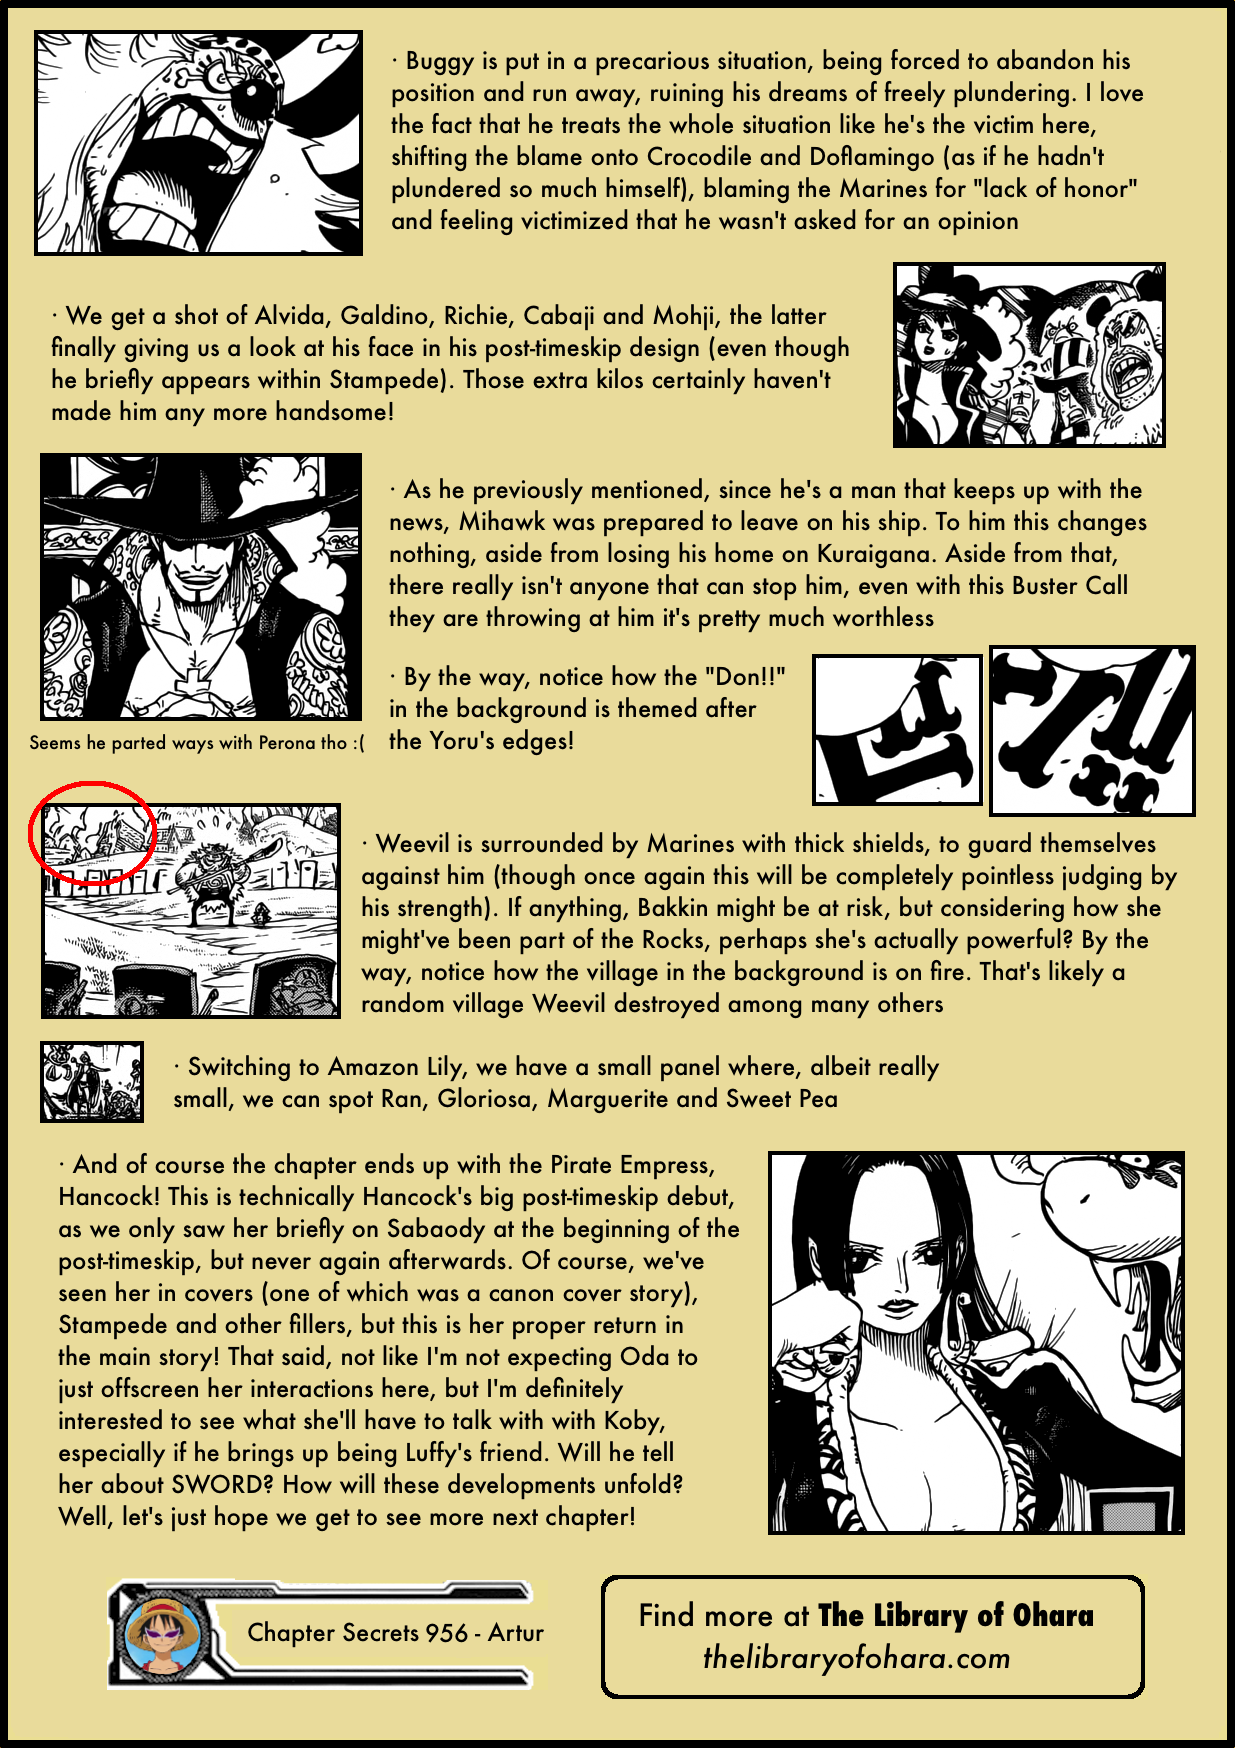 Chapter Secrets Chapter 956 In Depth Analysis The Library Of Ohara